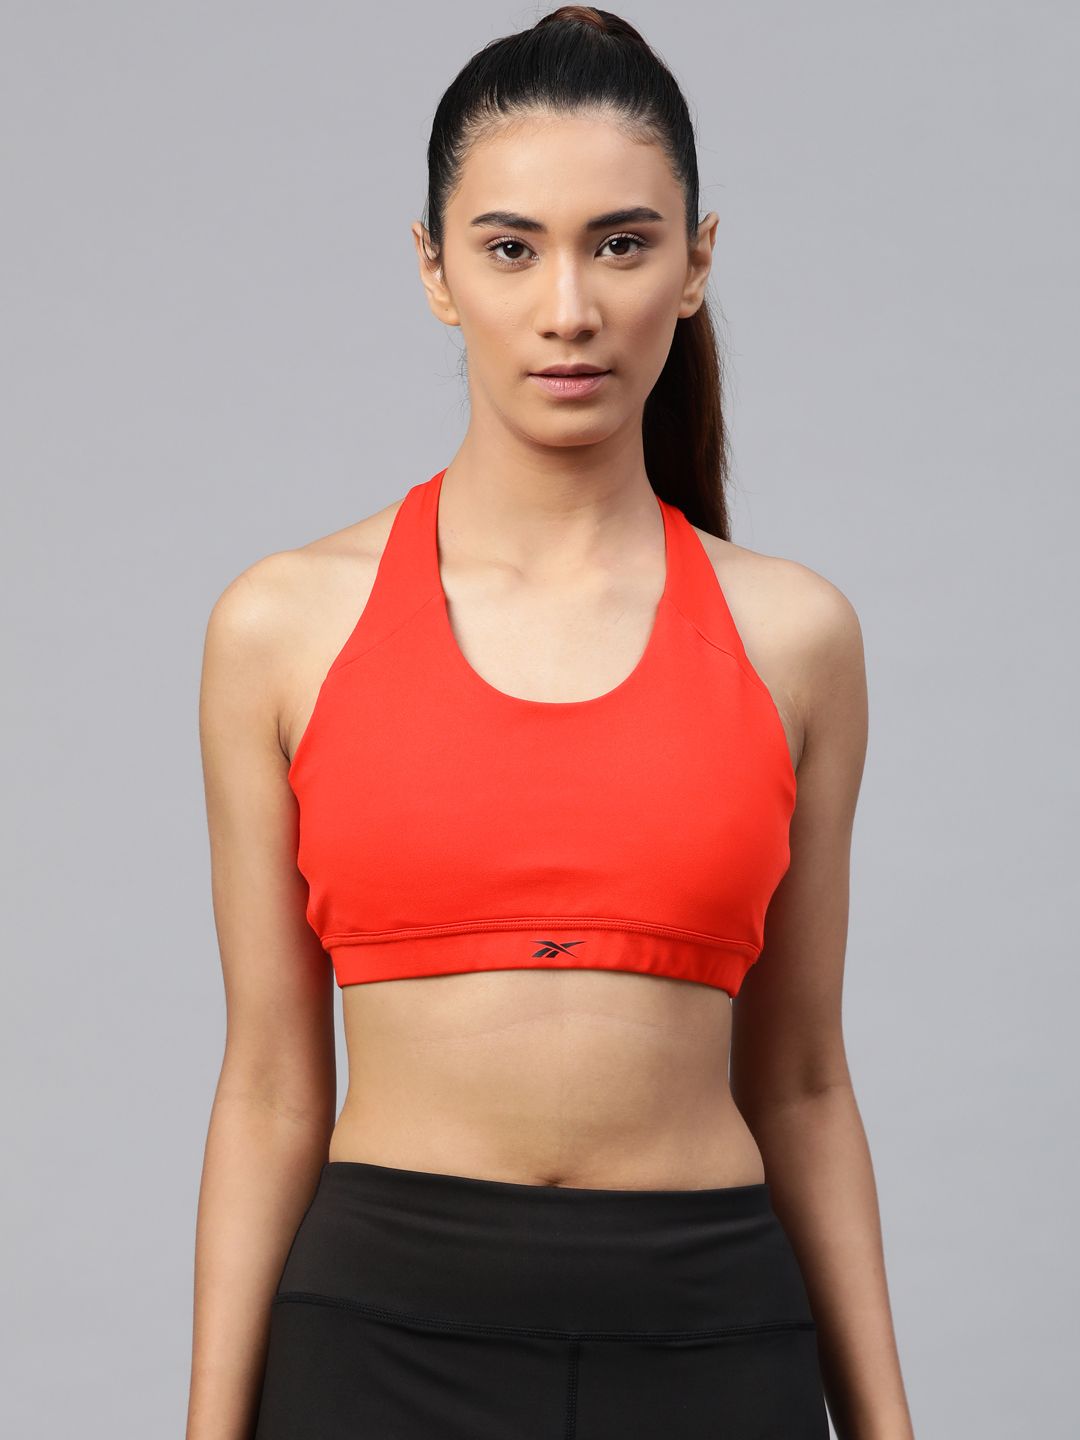 Reebok Women Red Solid Removable Padding Training Workout Ready Bra GL2882 Price in India